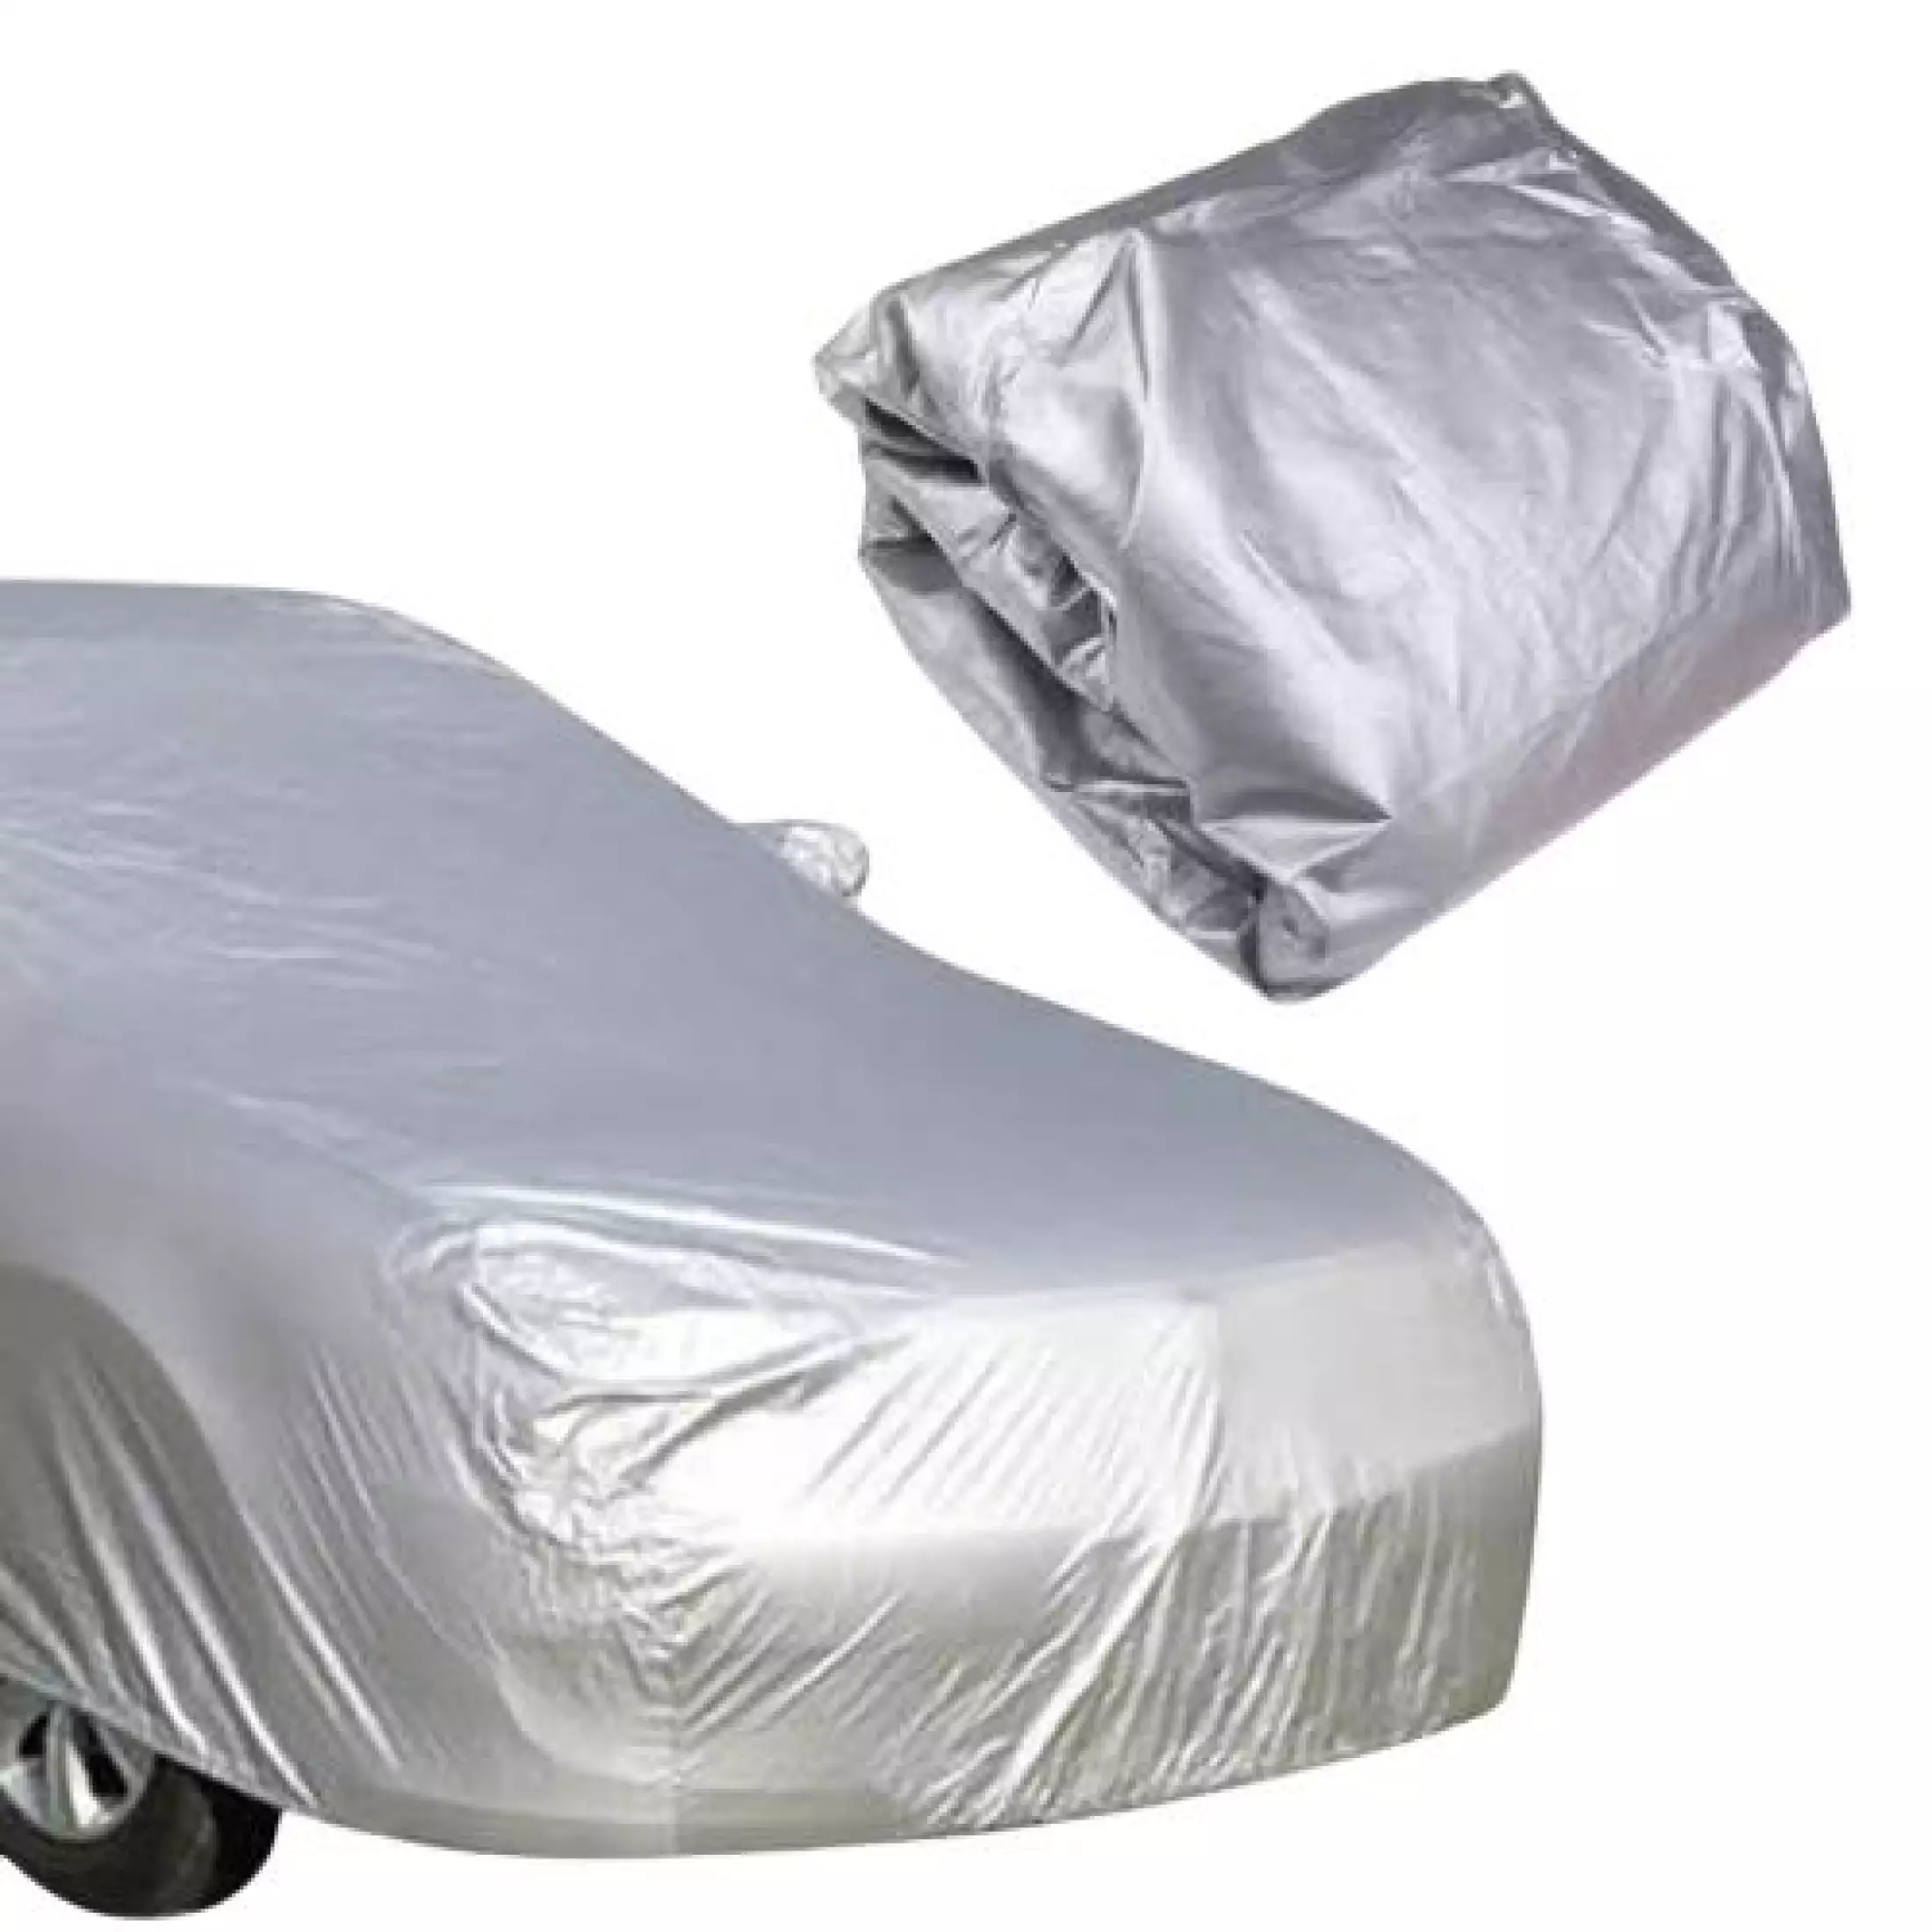 KRS KIA STONIC CAR COVER, With Synthetic Chamois Towel